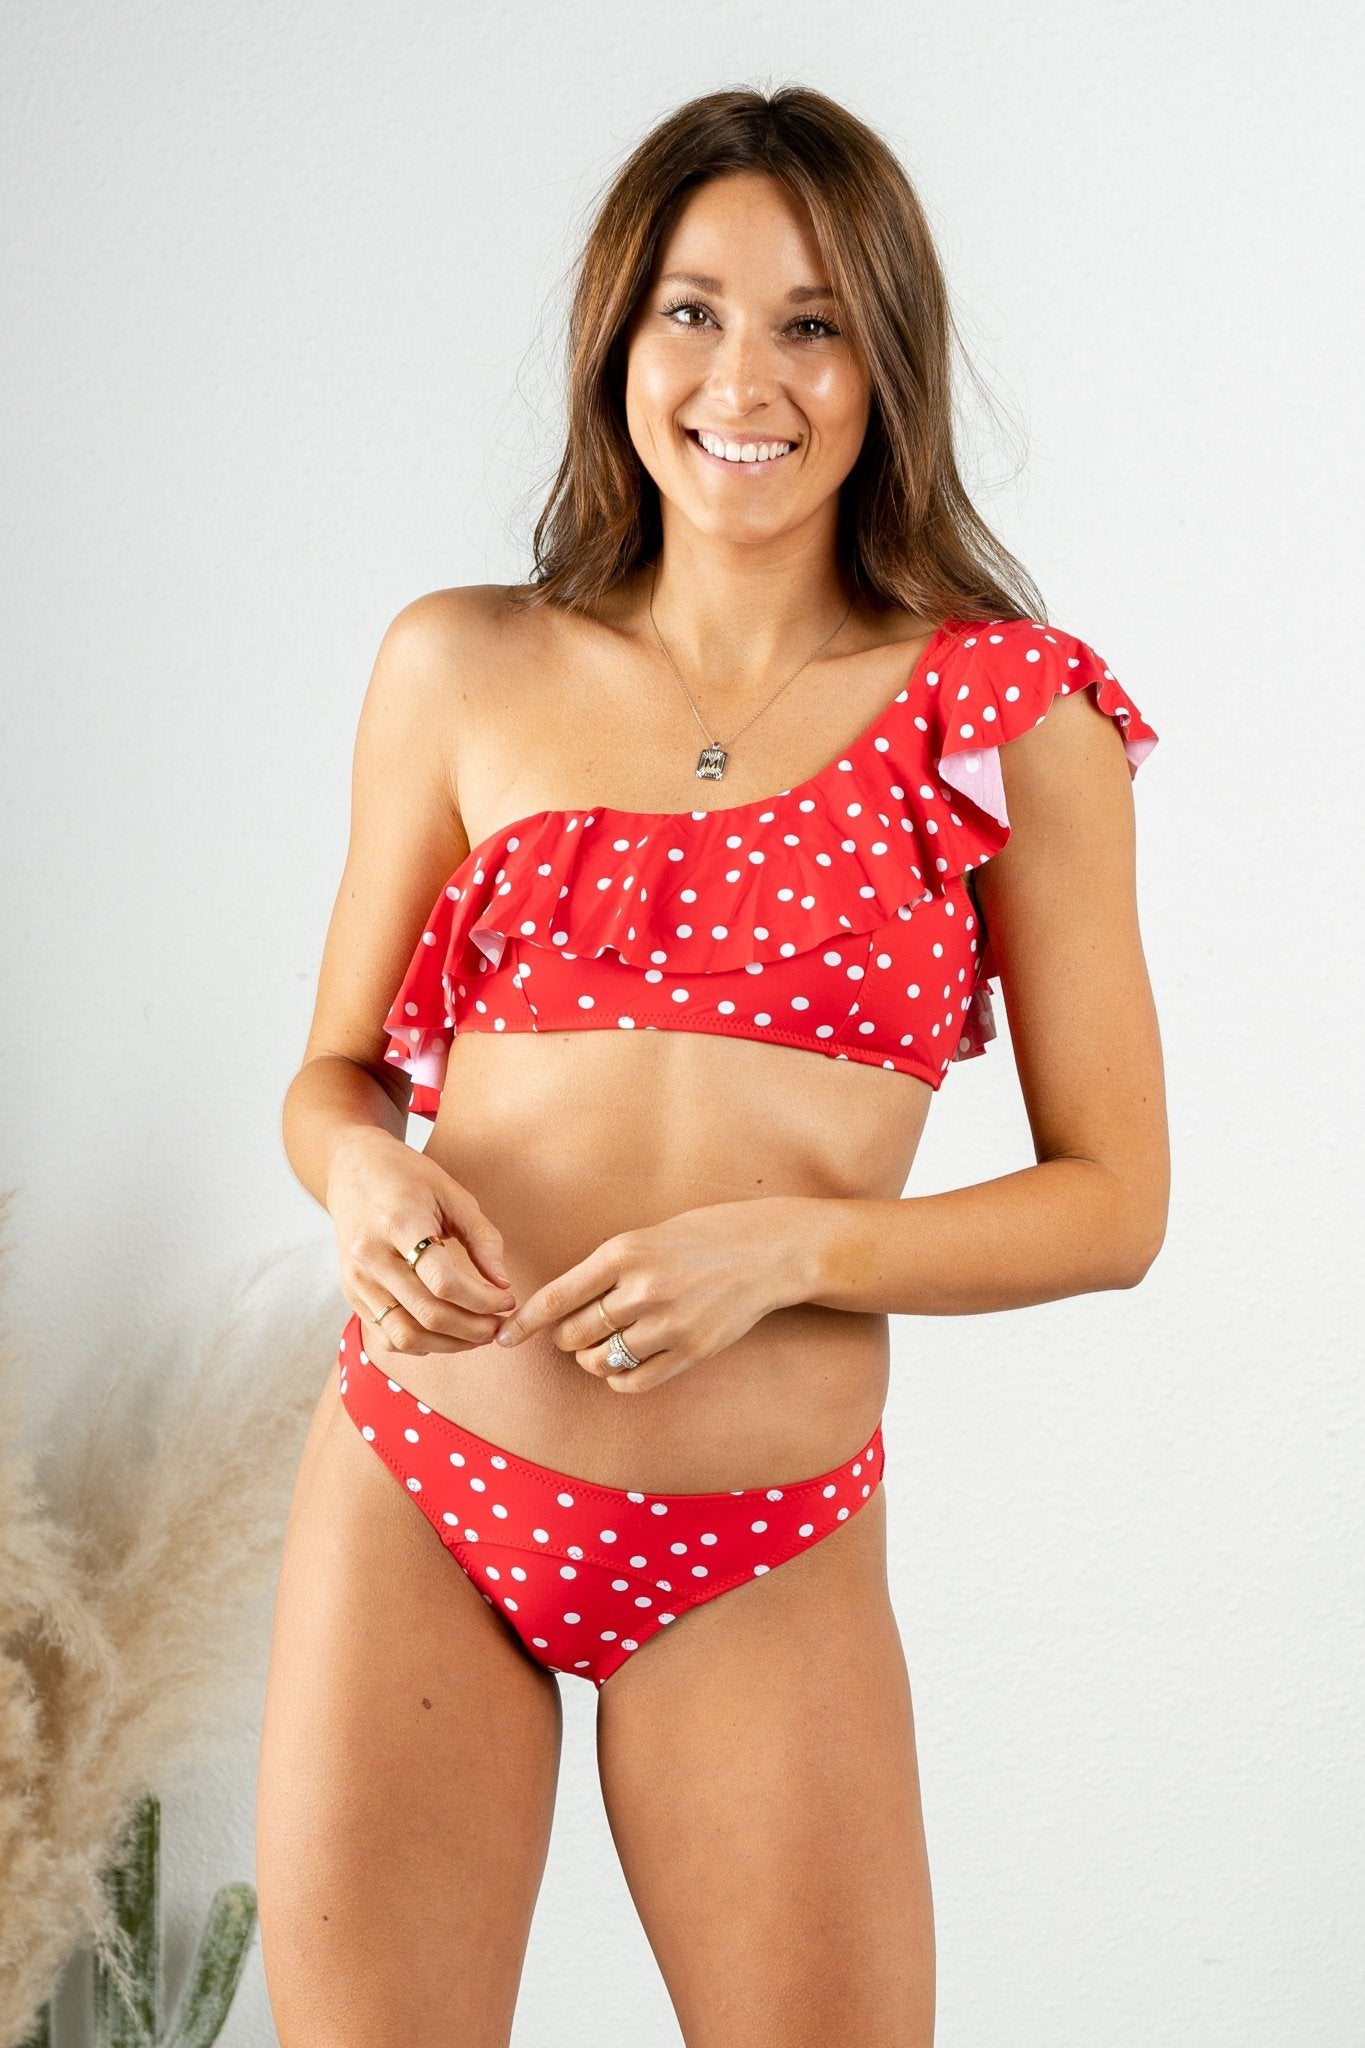 Polka dot swim bottoms red - Trendy swimsuit - Fashion Swimsuits at Lush Fashion Lounge Boutique in Oklahoma City